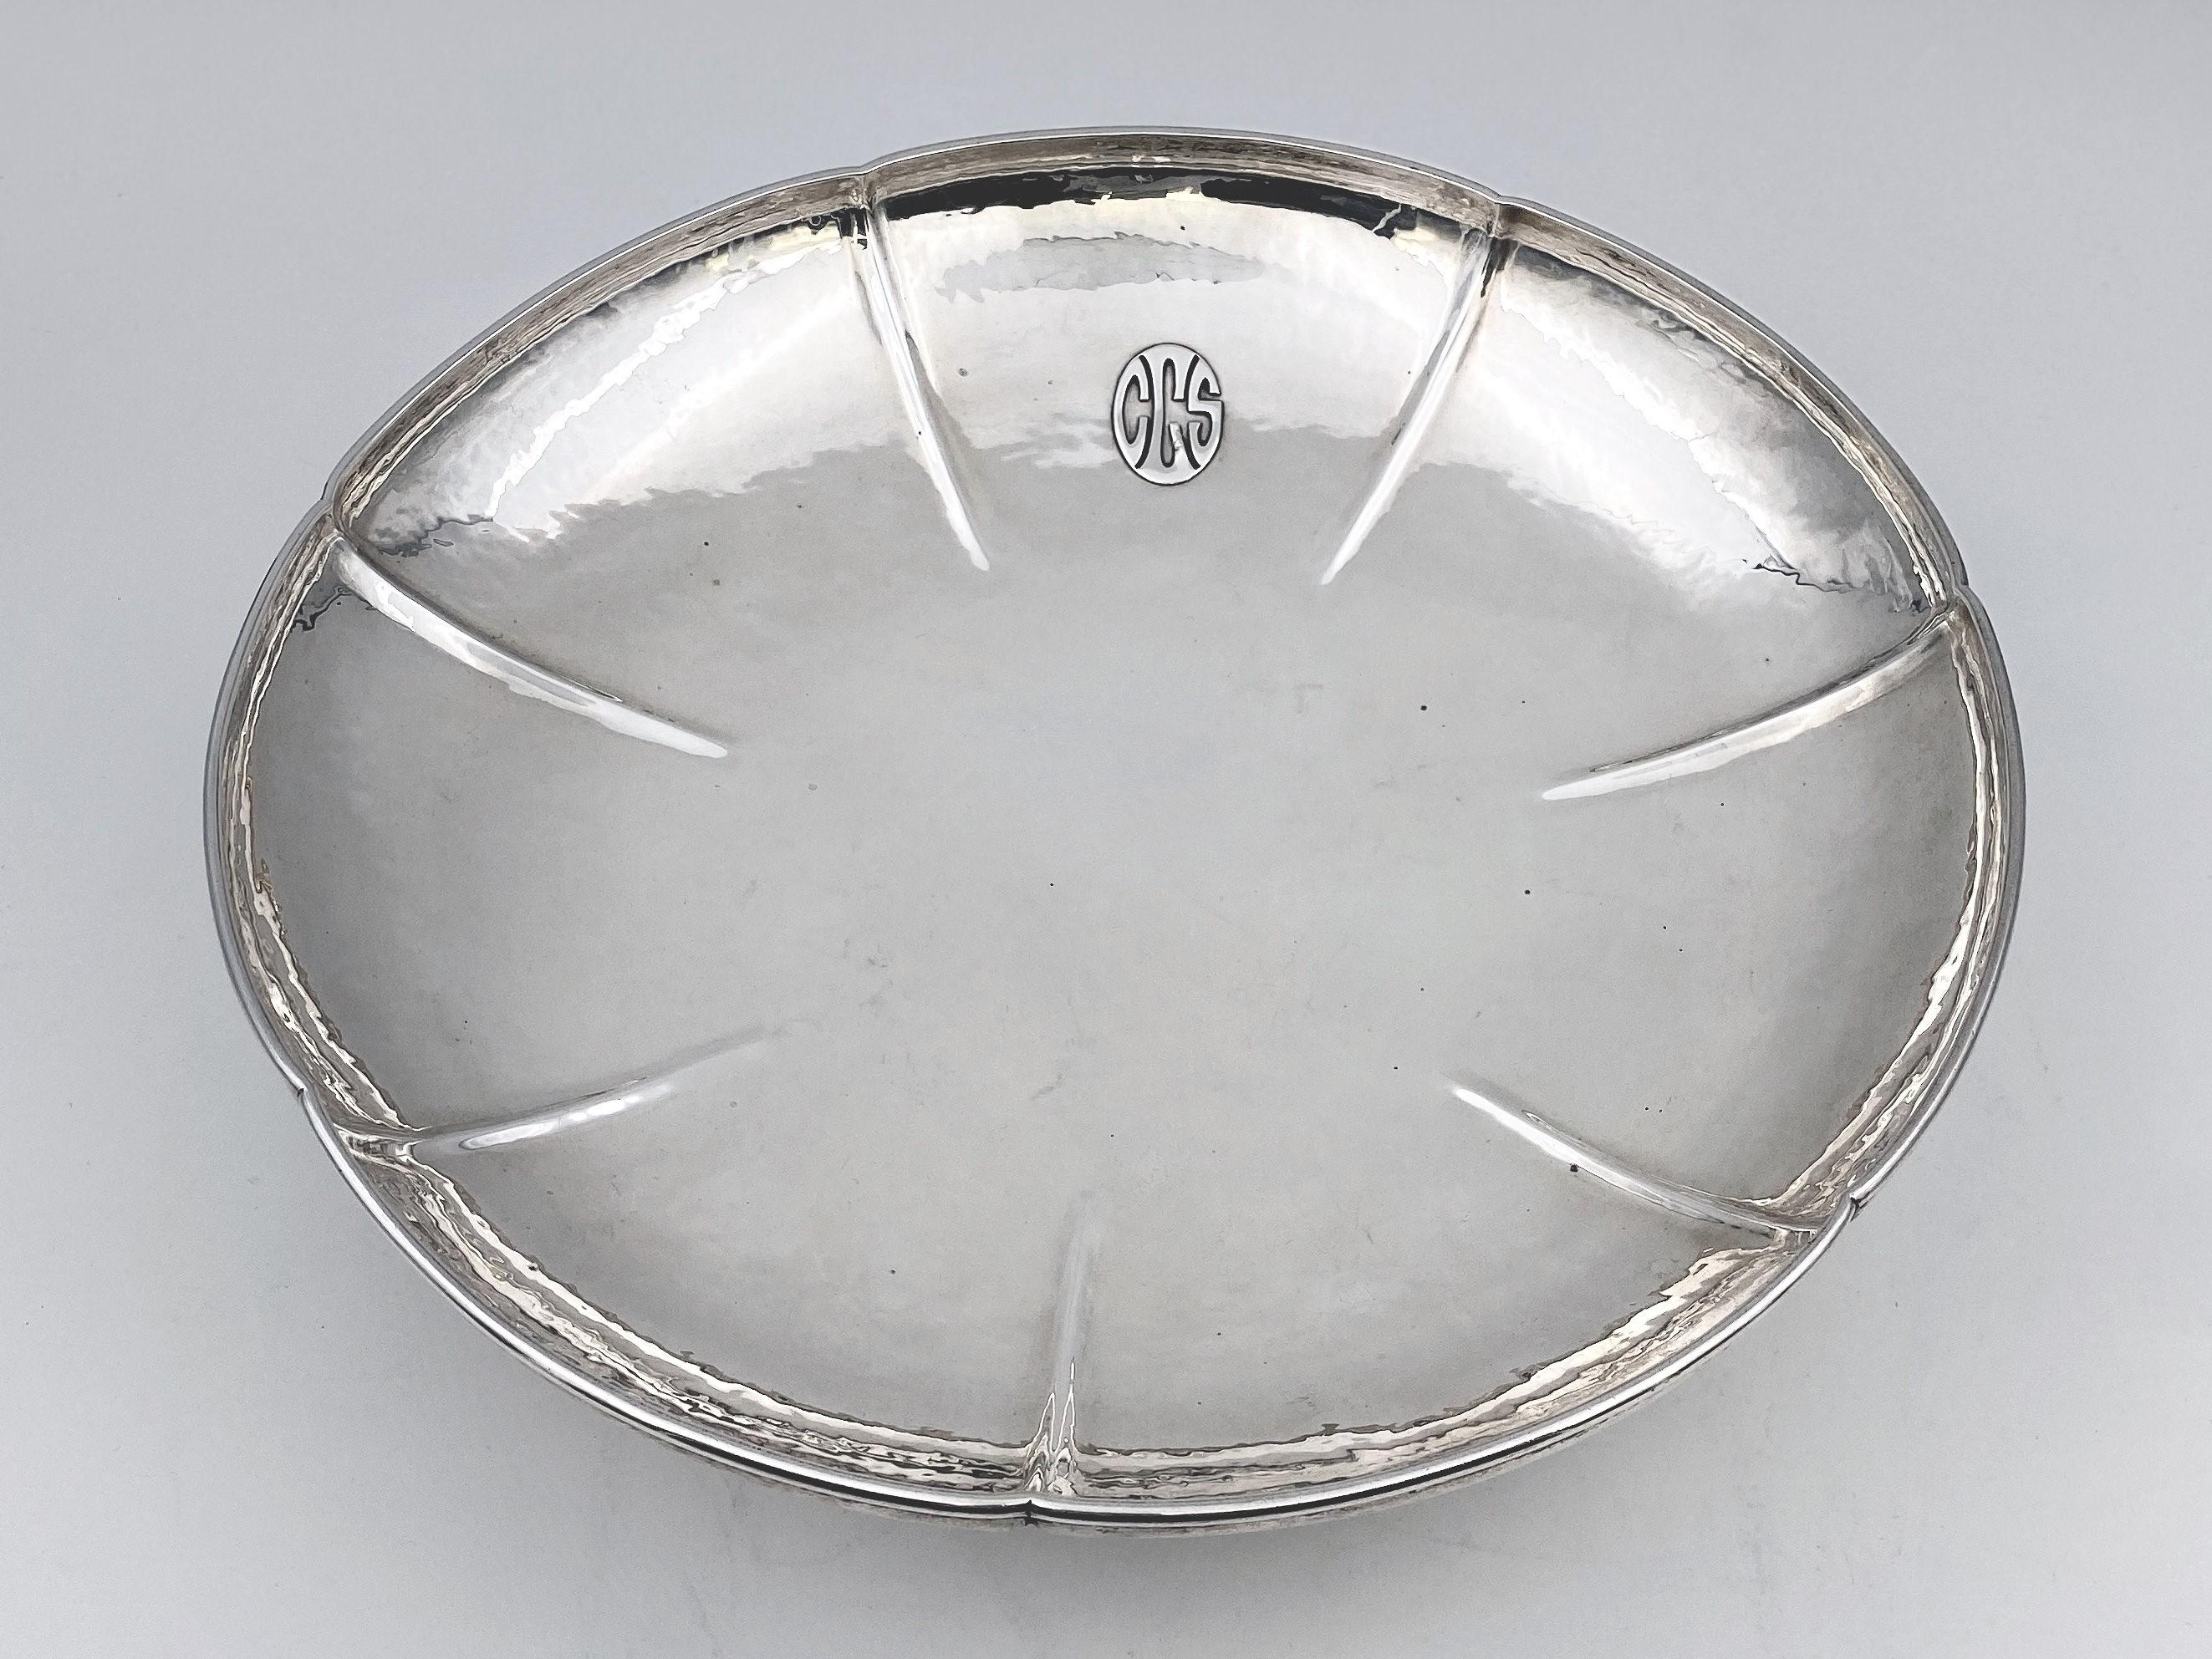 Lebolt & Co. sterling silver, hand beaten compote bowl on long stem flaring to circular foot. The compote has an applied engraving inside of the bowl in Arts & Crafts style, measuring 3 1/4 inches in height and 12 inches in diameter. The weight is